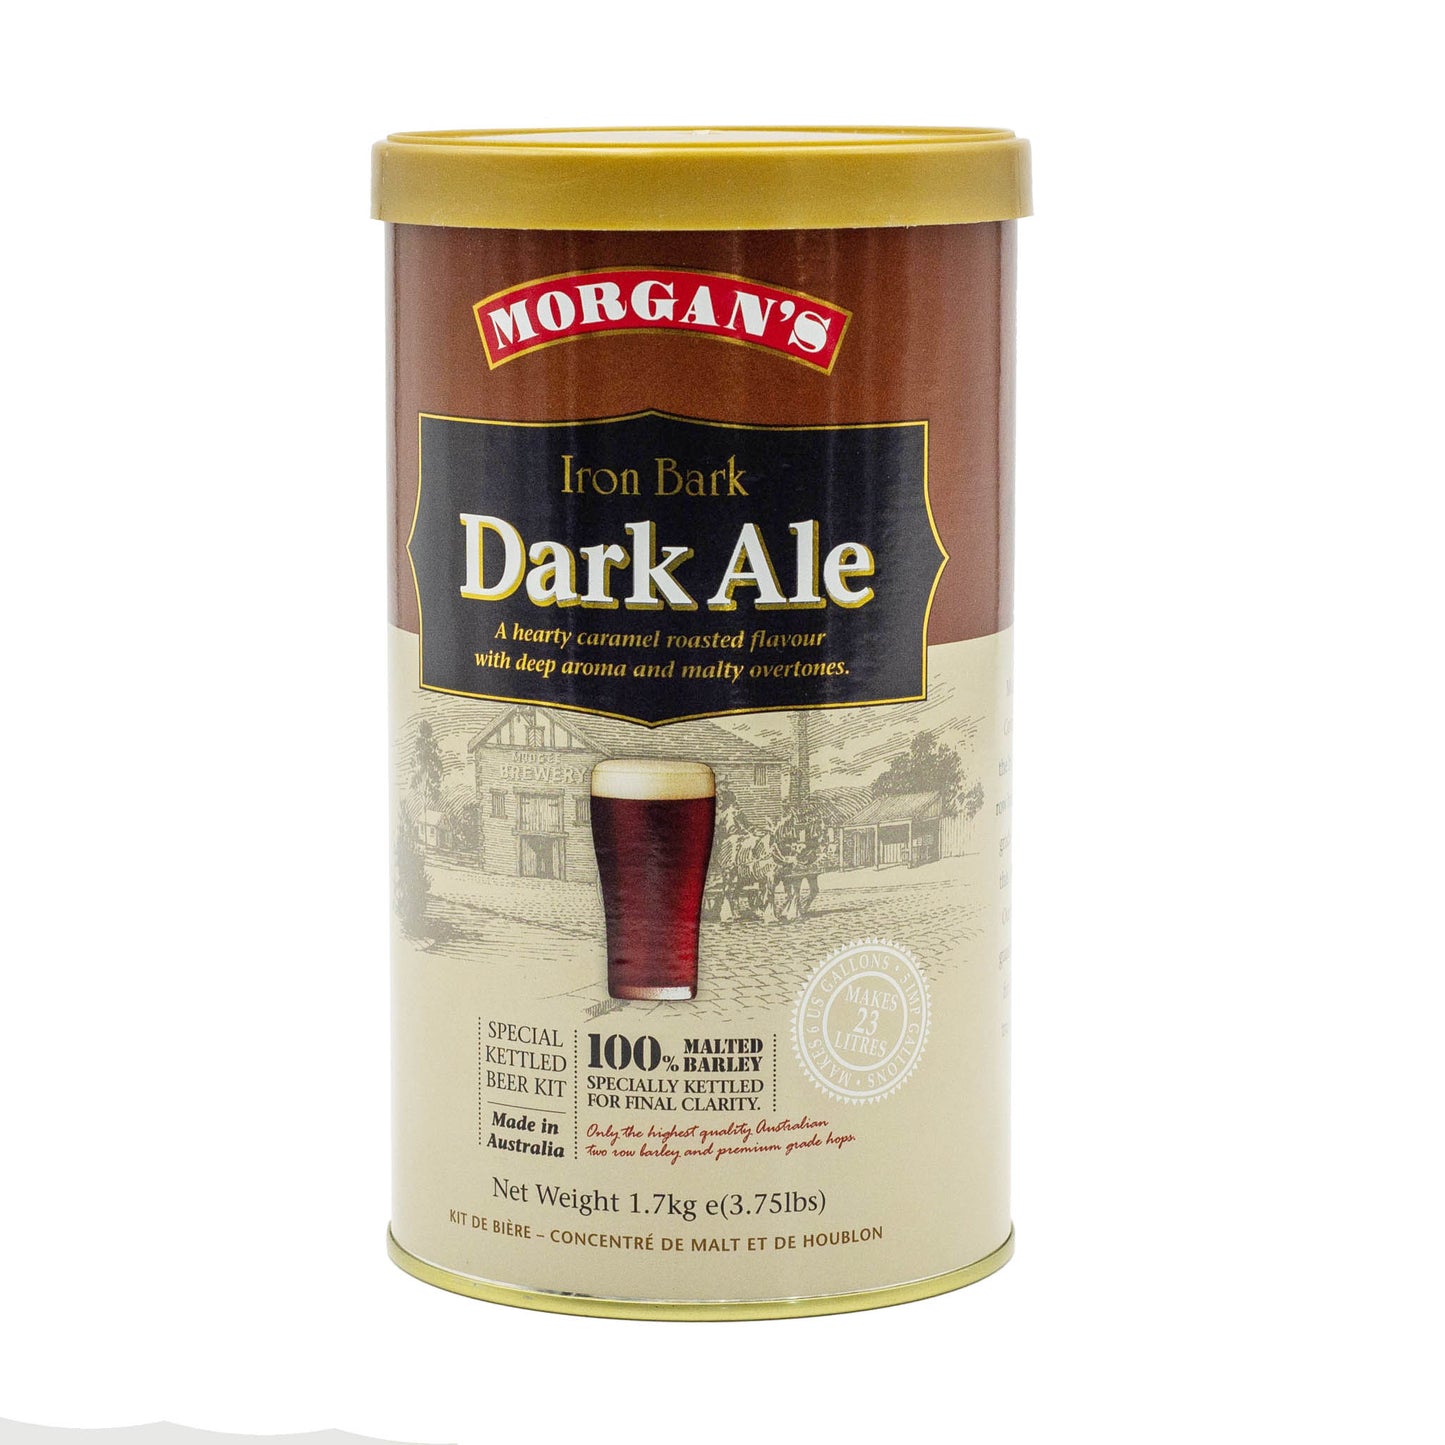 Morgans Premium Iron Bark Dark Ale brew tin makes a hearty caramel roasted flavoured beer with deep aroma and nutty overtones